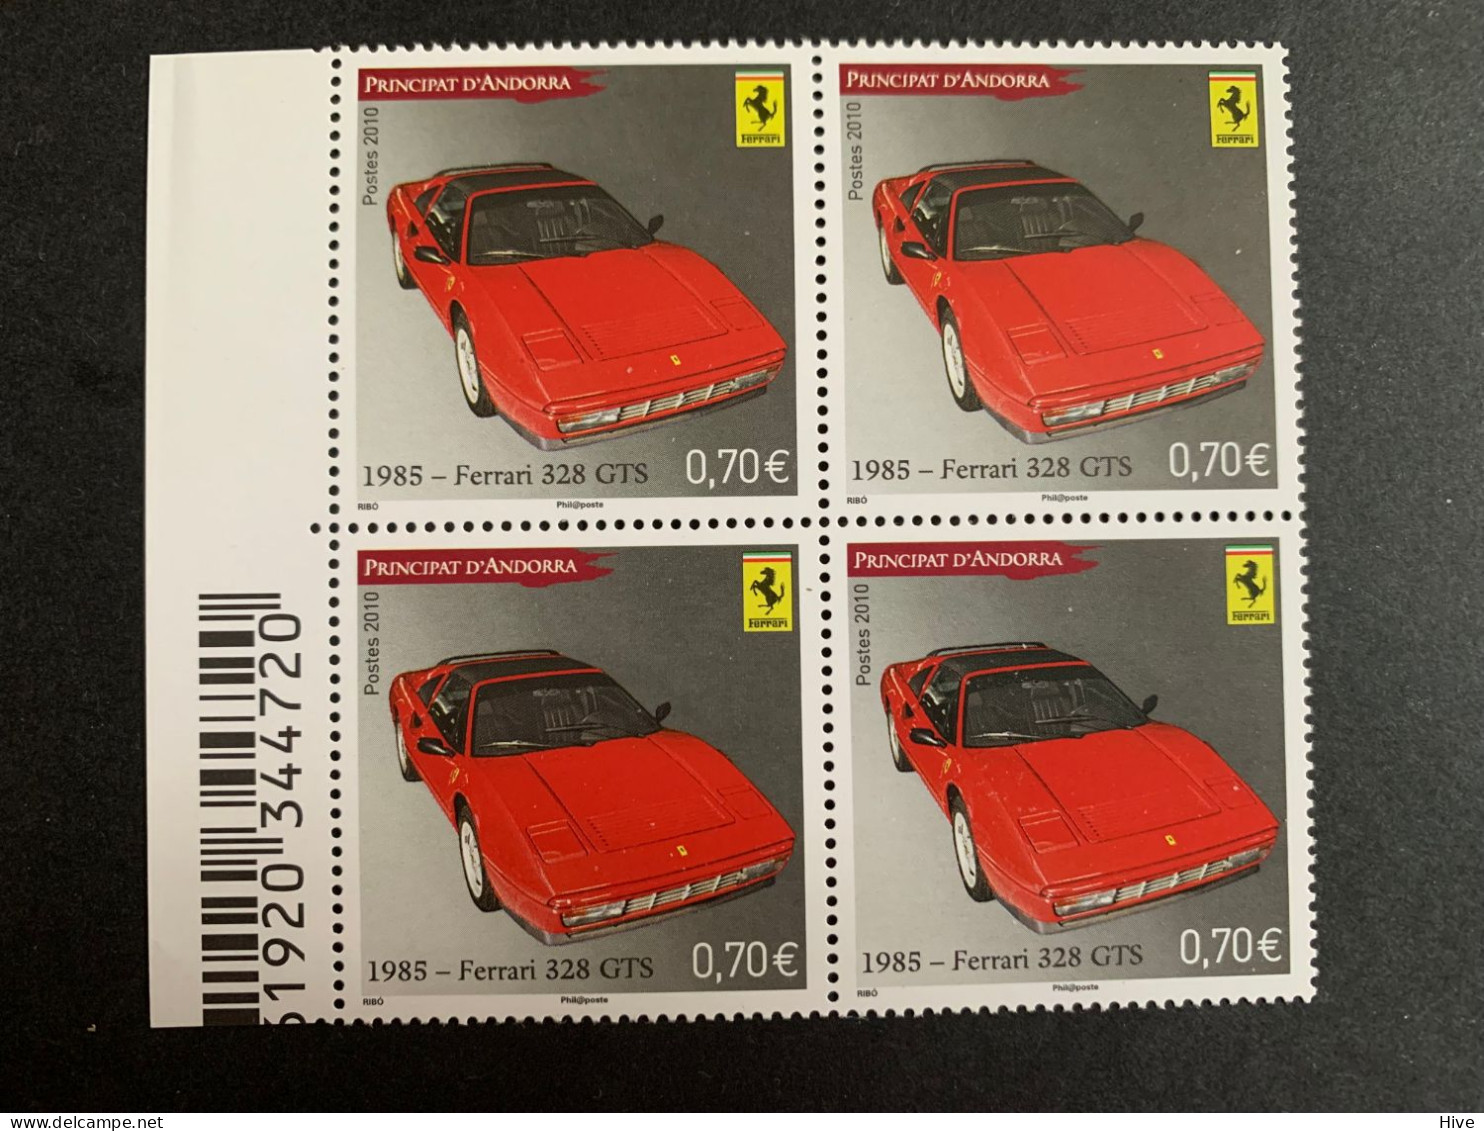 French Andorra 2010 Yv. 696, Automobiles, Cars, Ferrari - MNH - Unused Stamps